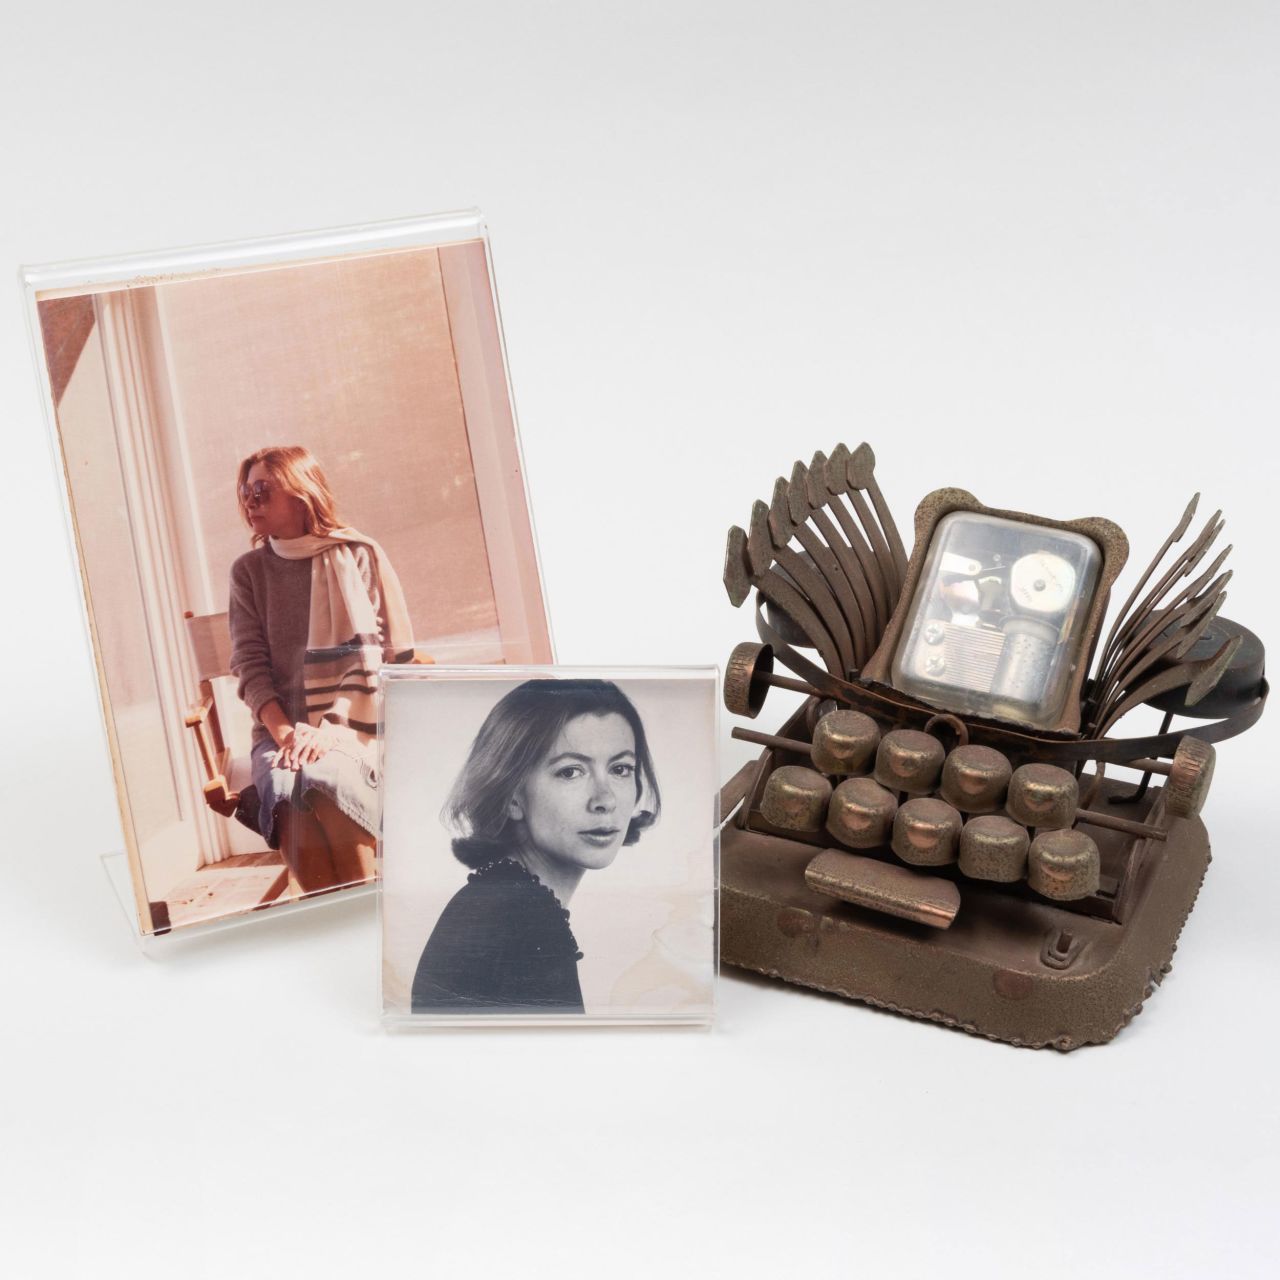 Booklovers and style mavens are agog over personal items up for auction that once belonged to the seminal essayist Joan Didion